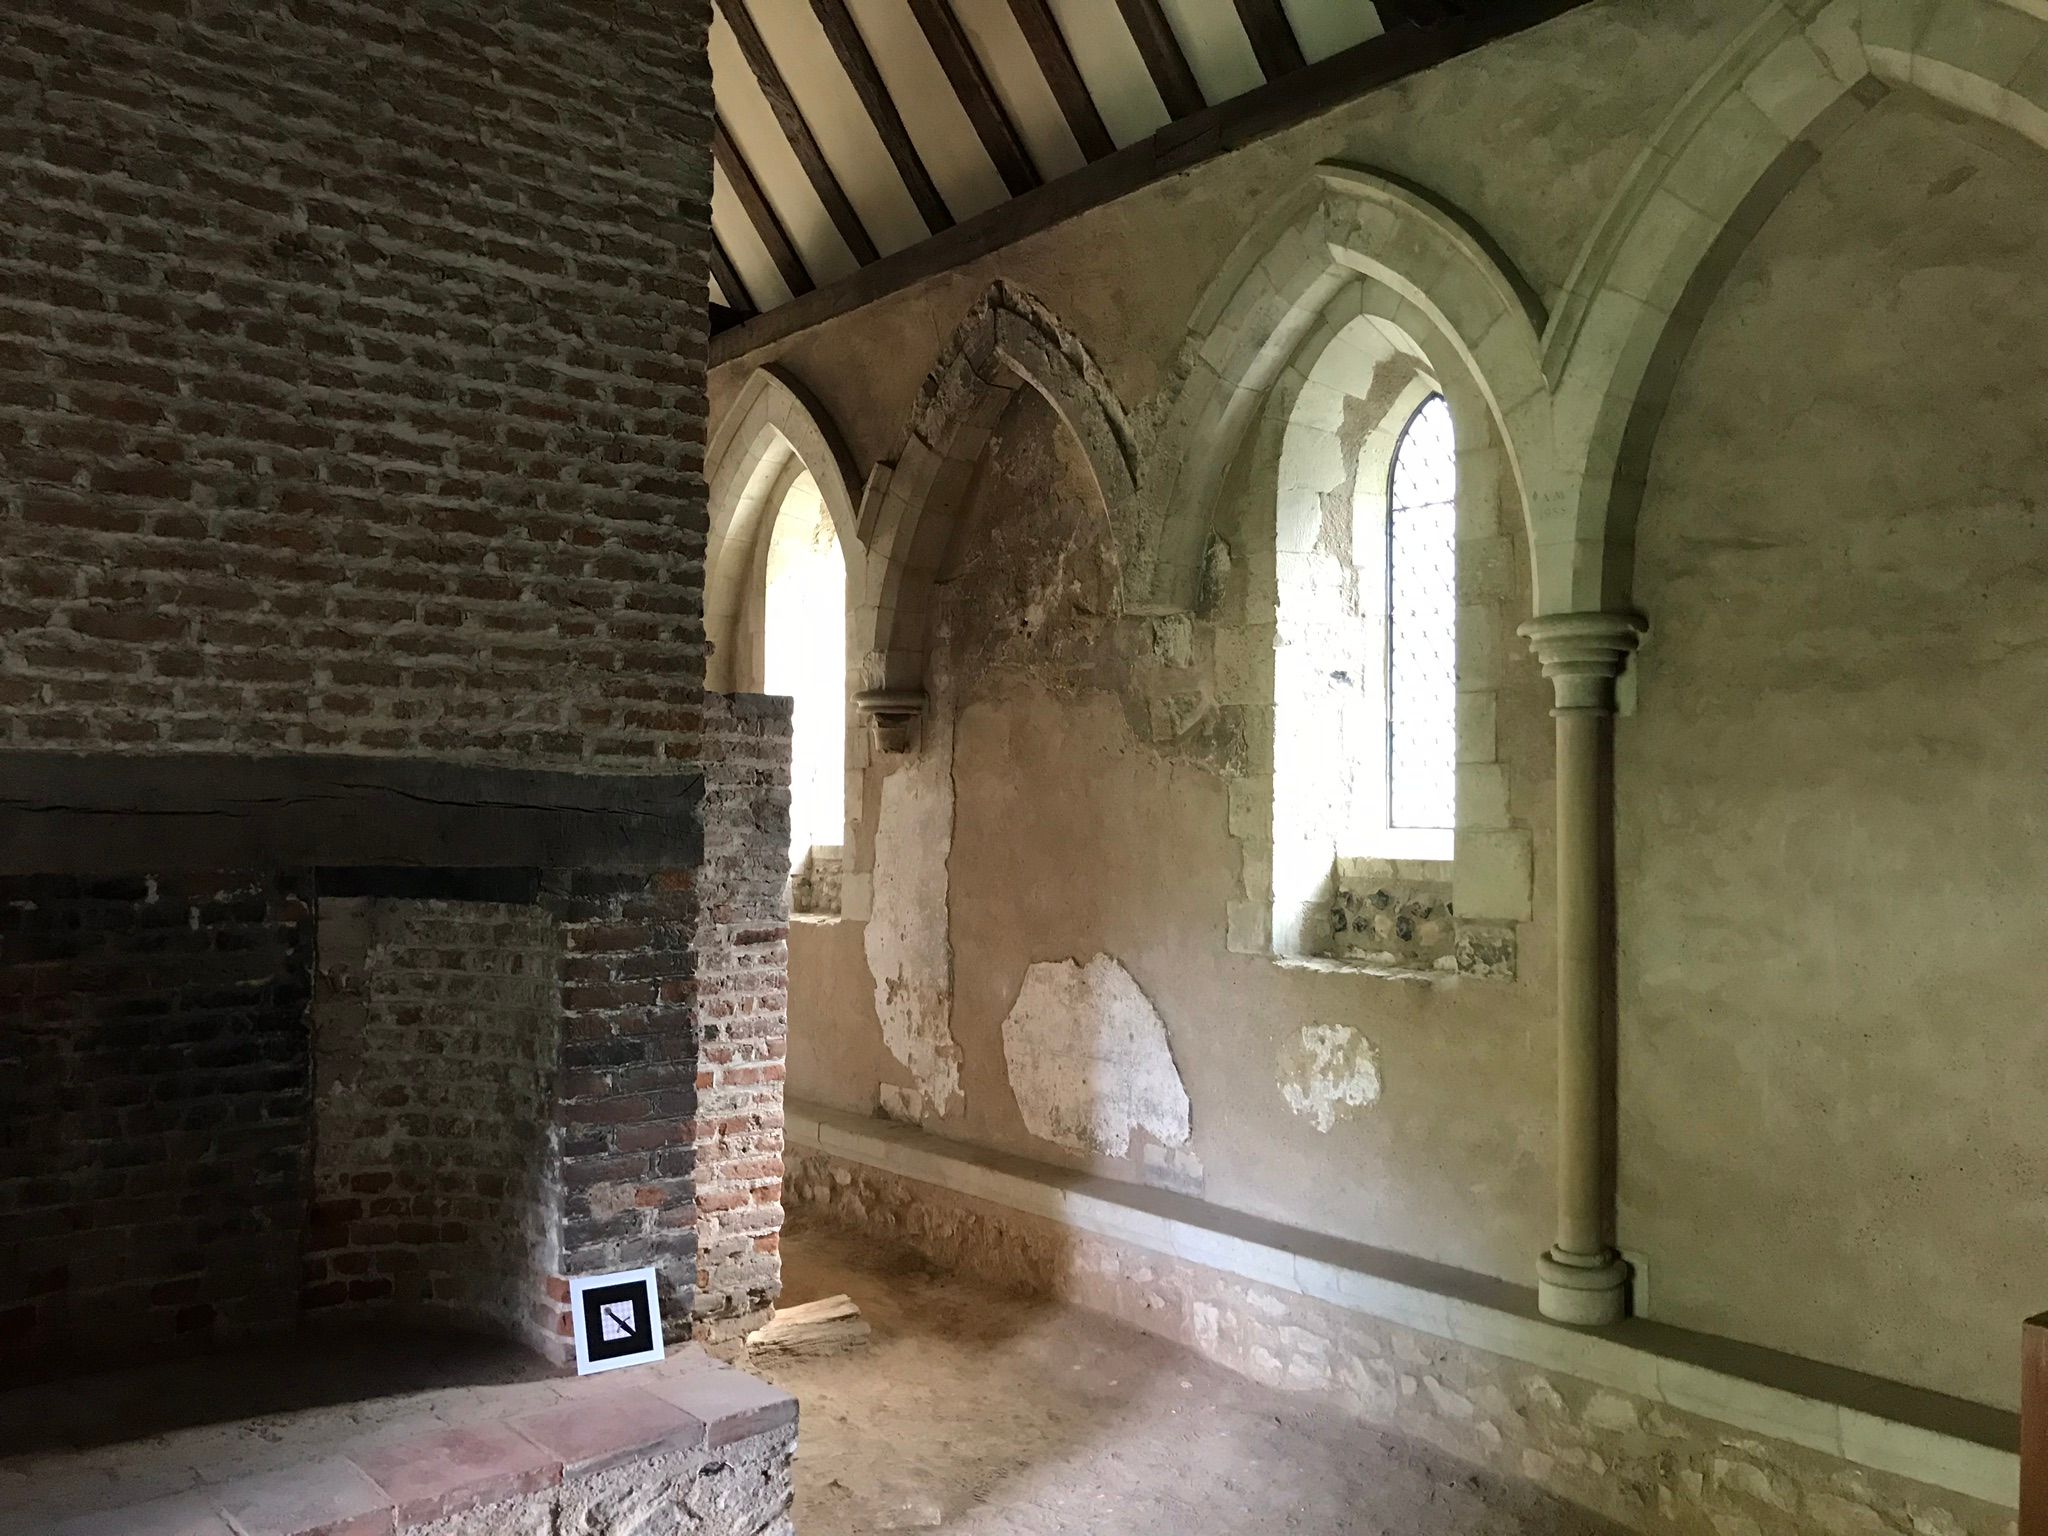 Inside the 13th Century hall of Temple Manor, where you can see the carved window arches and old fire place